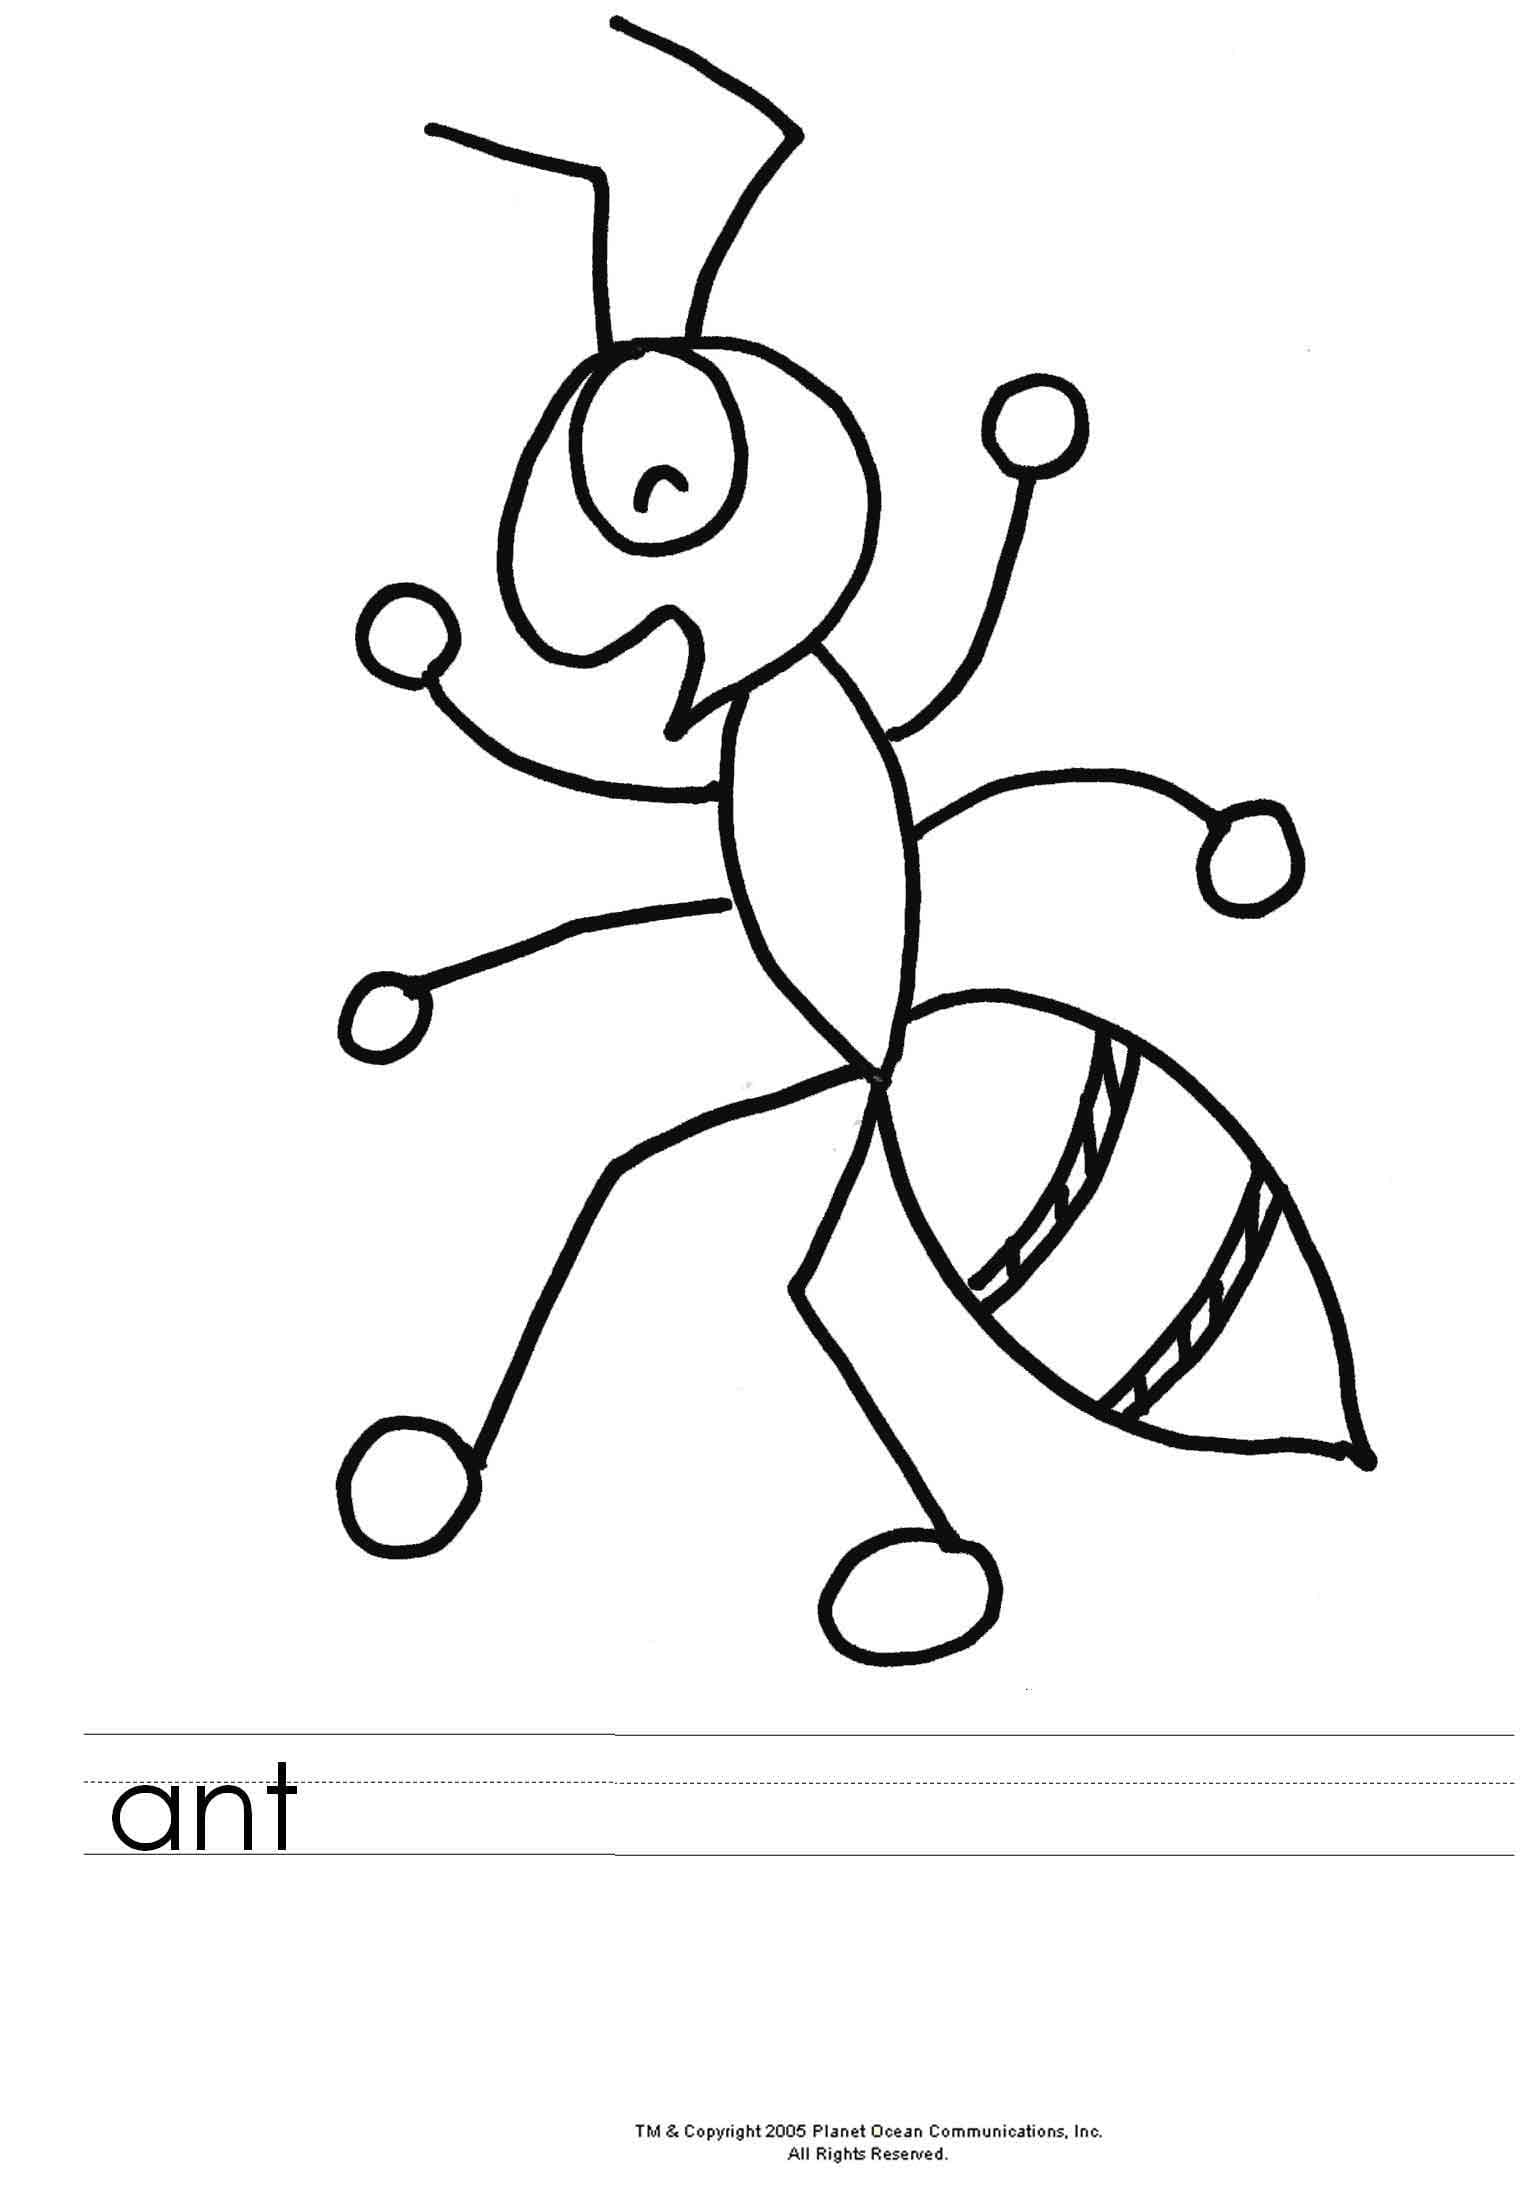 Ant Pleasant Coloring Pages   Coloring Cool